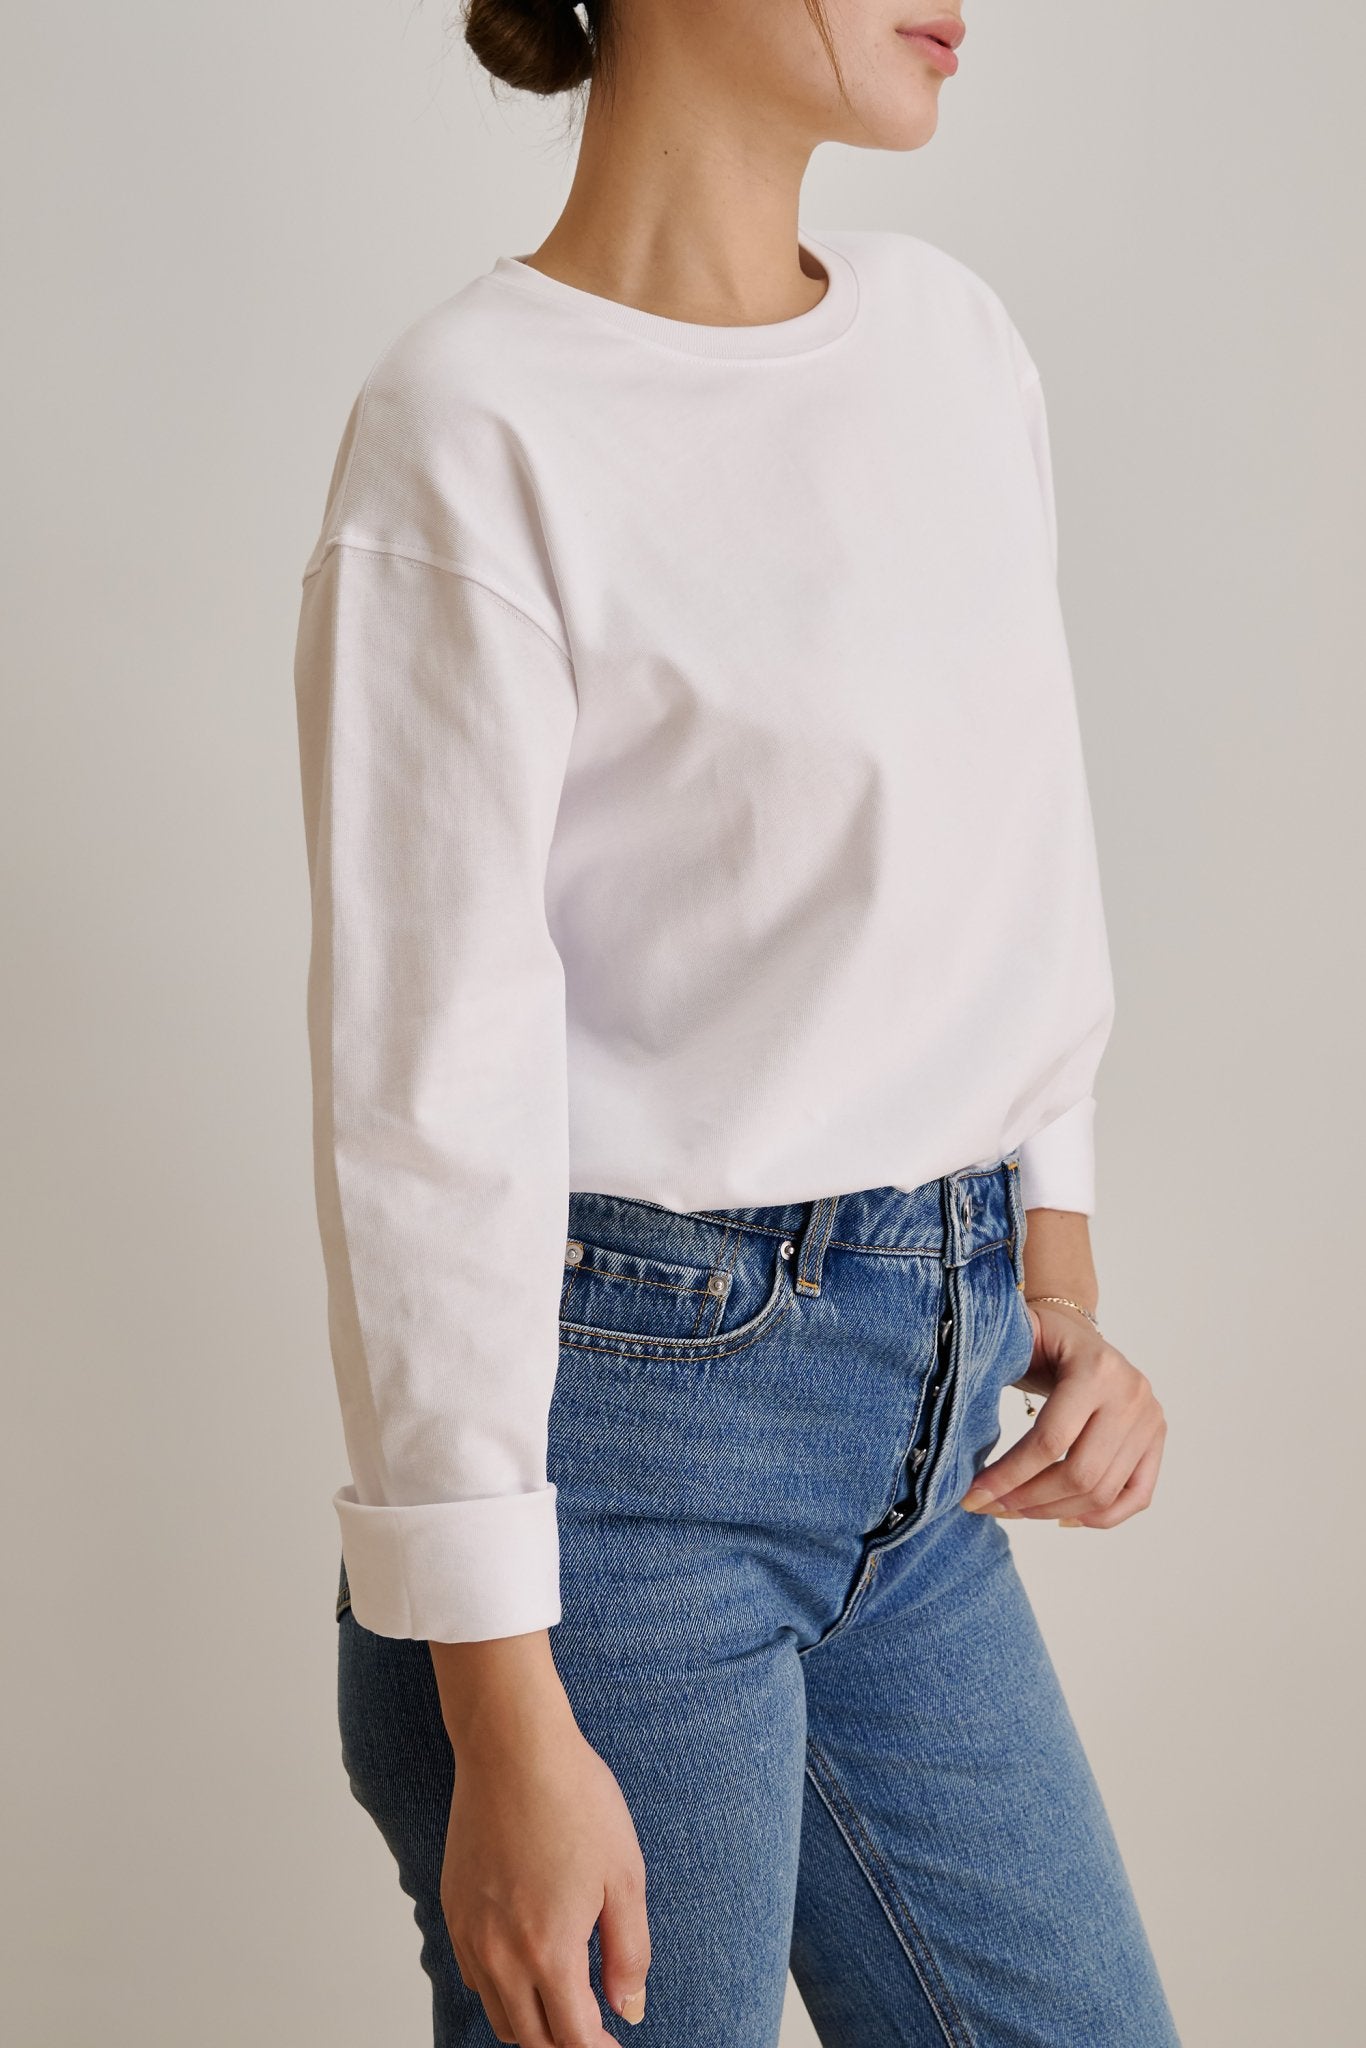 CILES cotton longsleeves top (White) - STELLAM